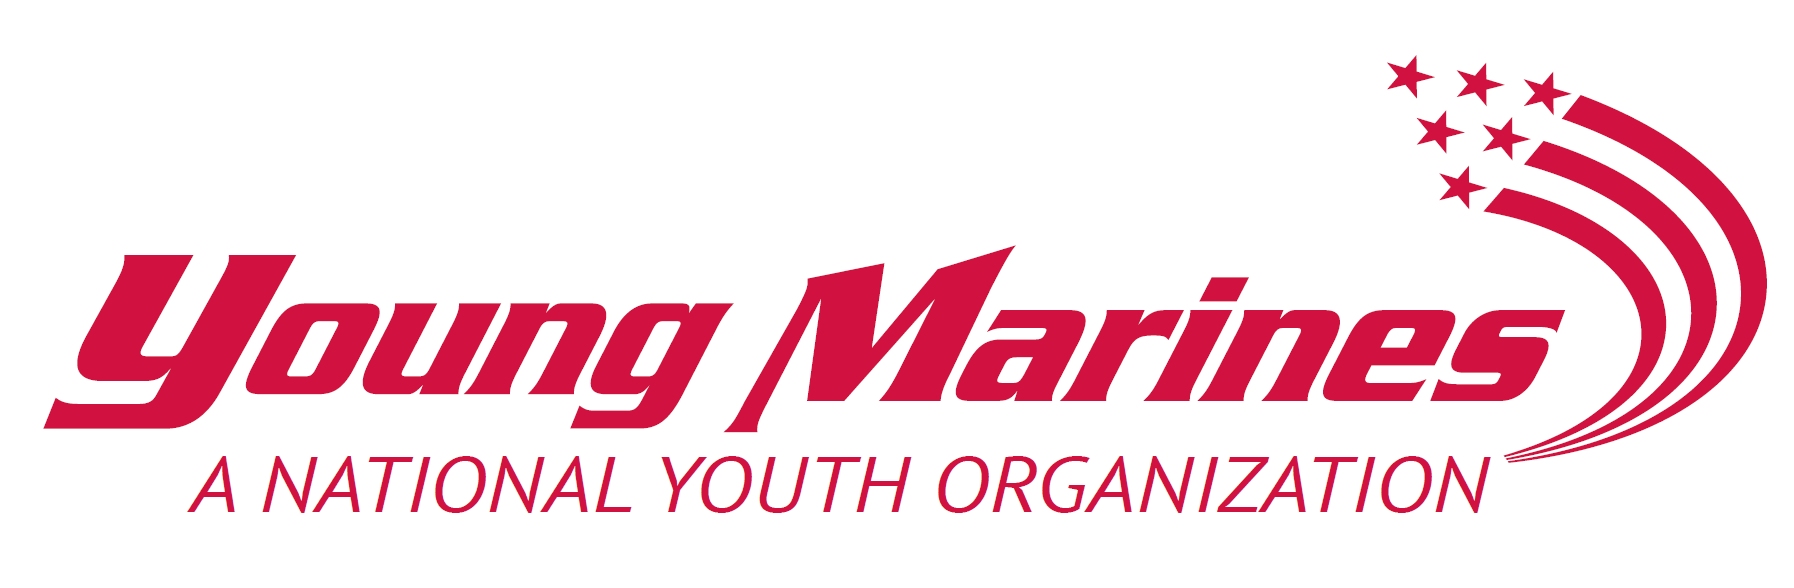 The Young Marines is a national non-profit youth education and service program for boys and girls